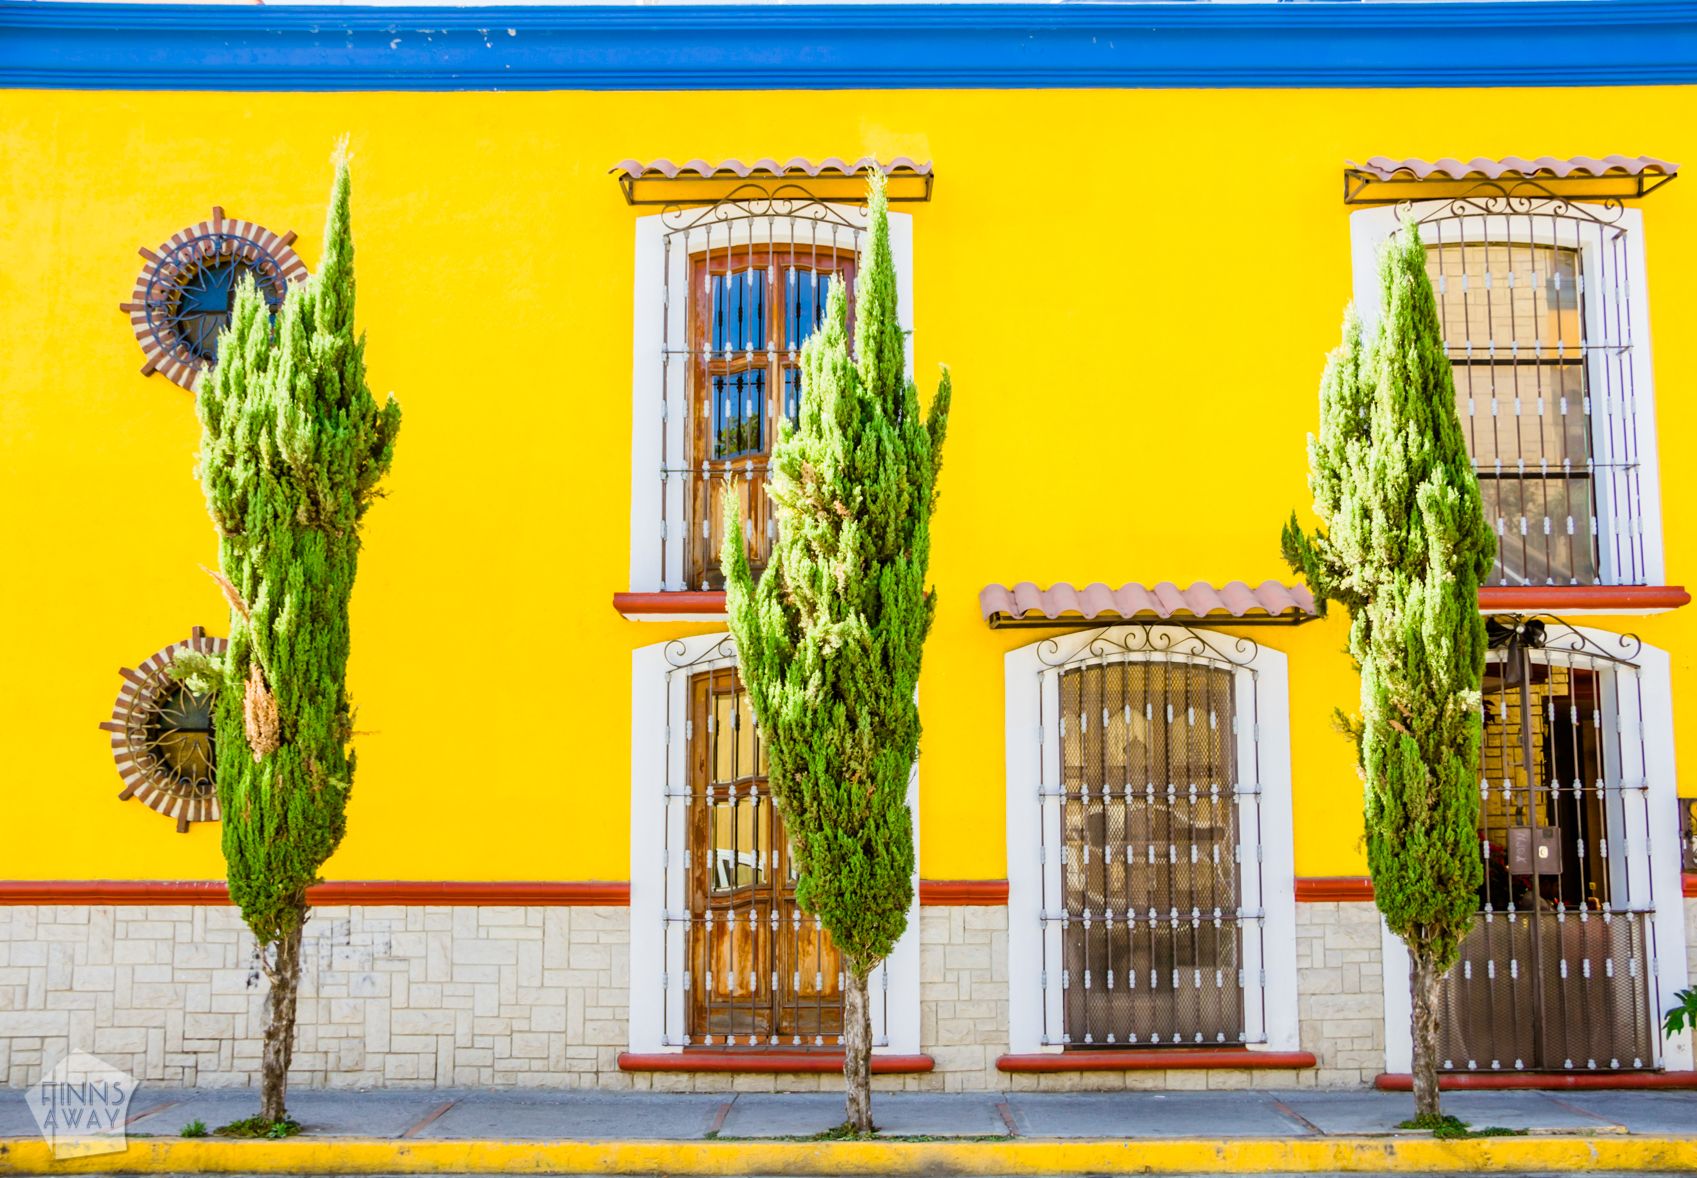 Beautiful house in Cholula | Mexico: Colonial city of Puebla and neighboring Cholula | FinnsAway Travel Blog